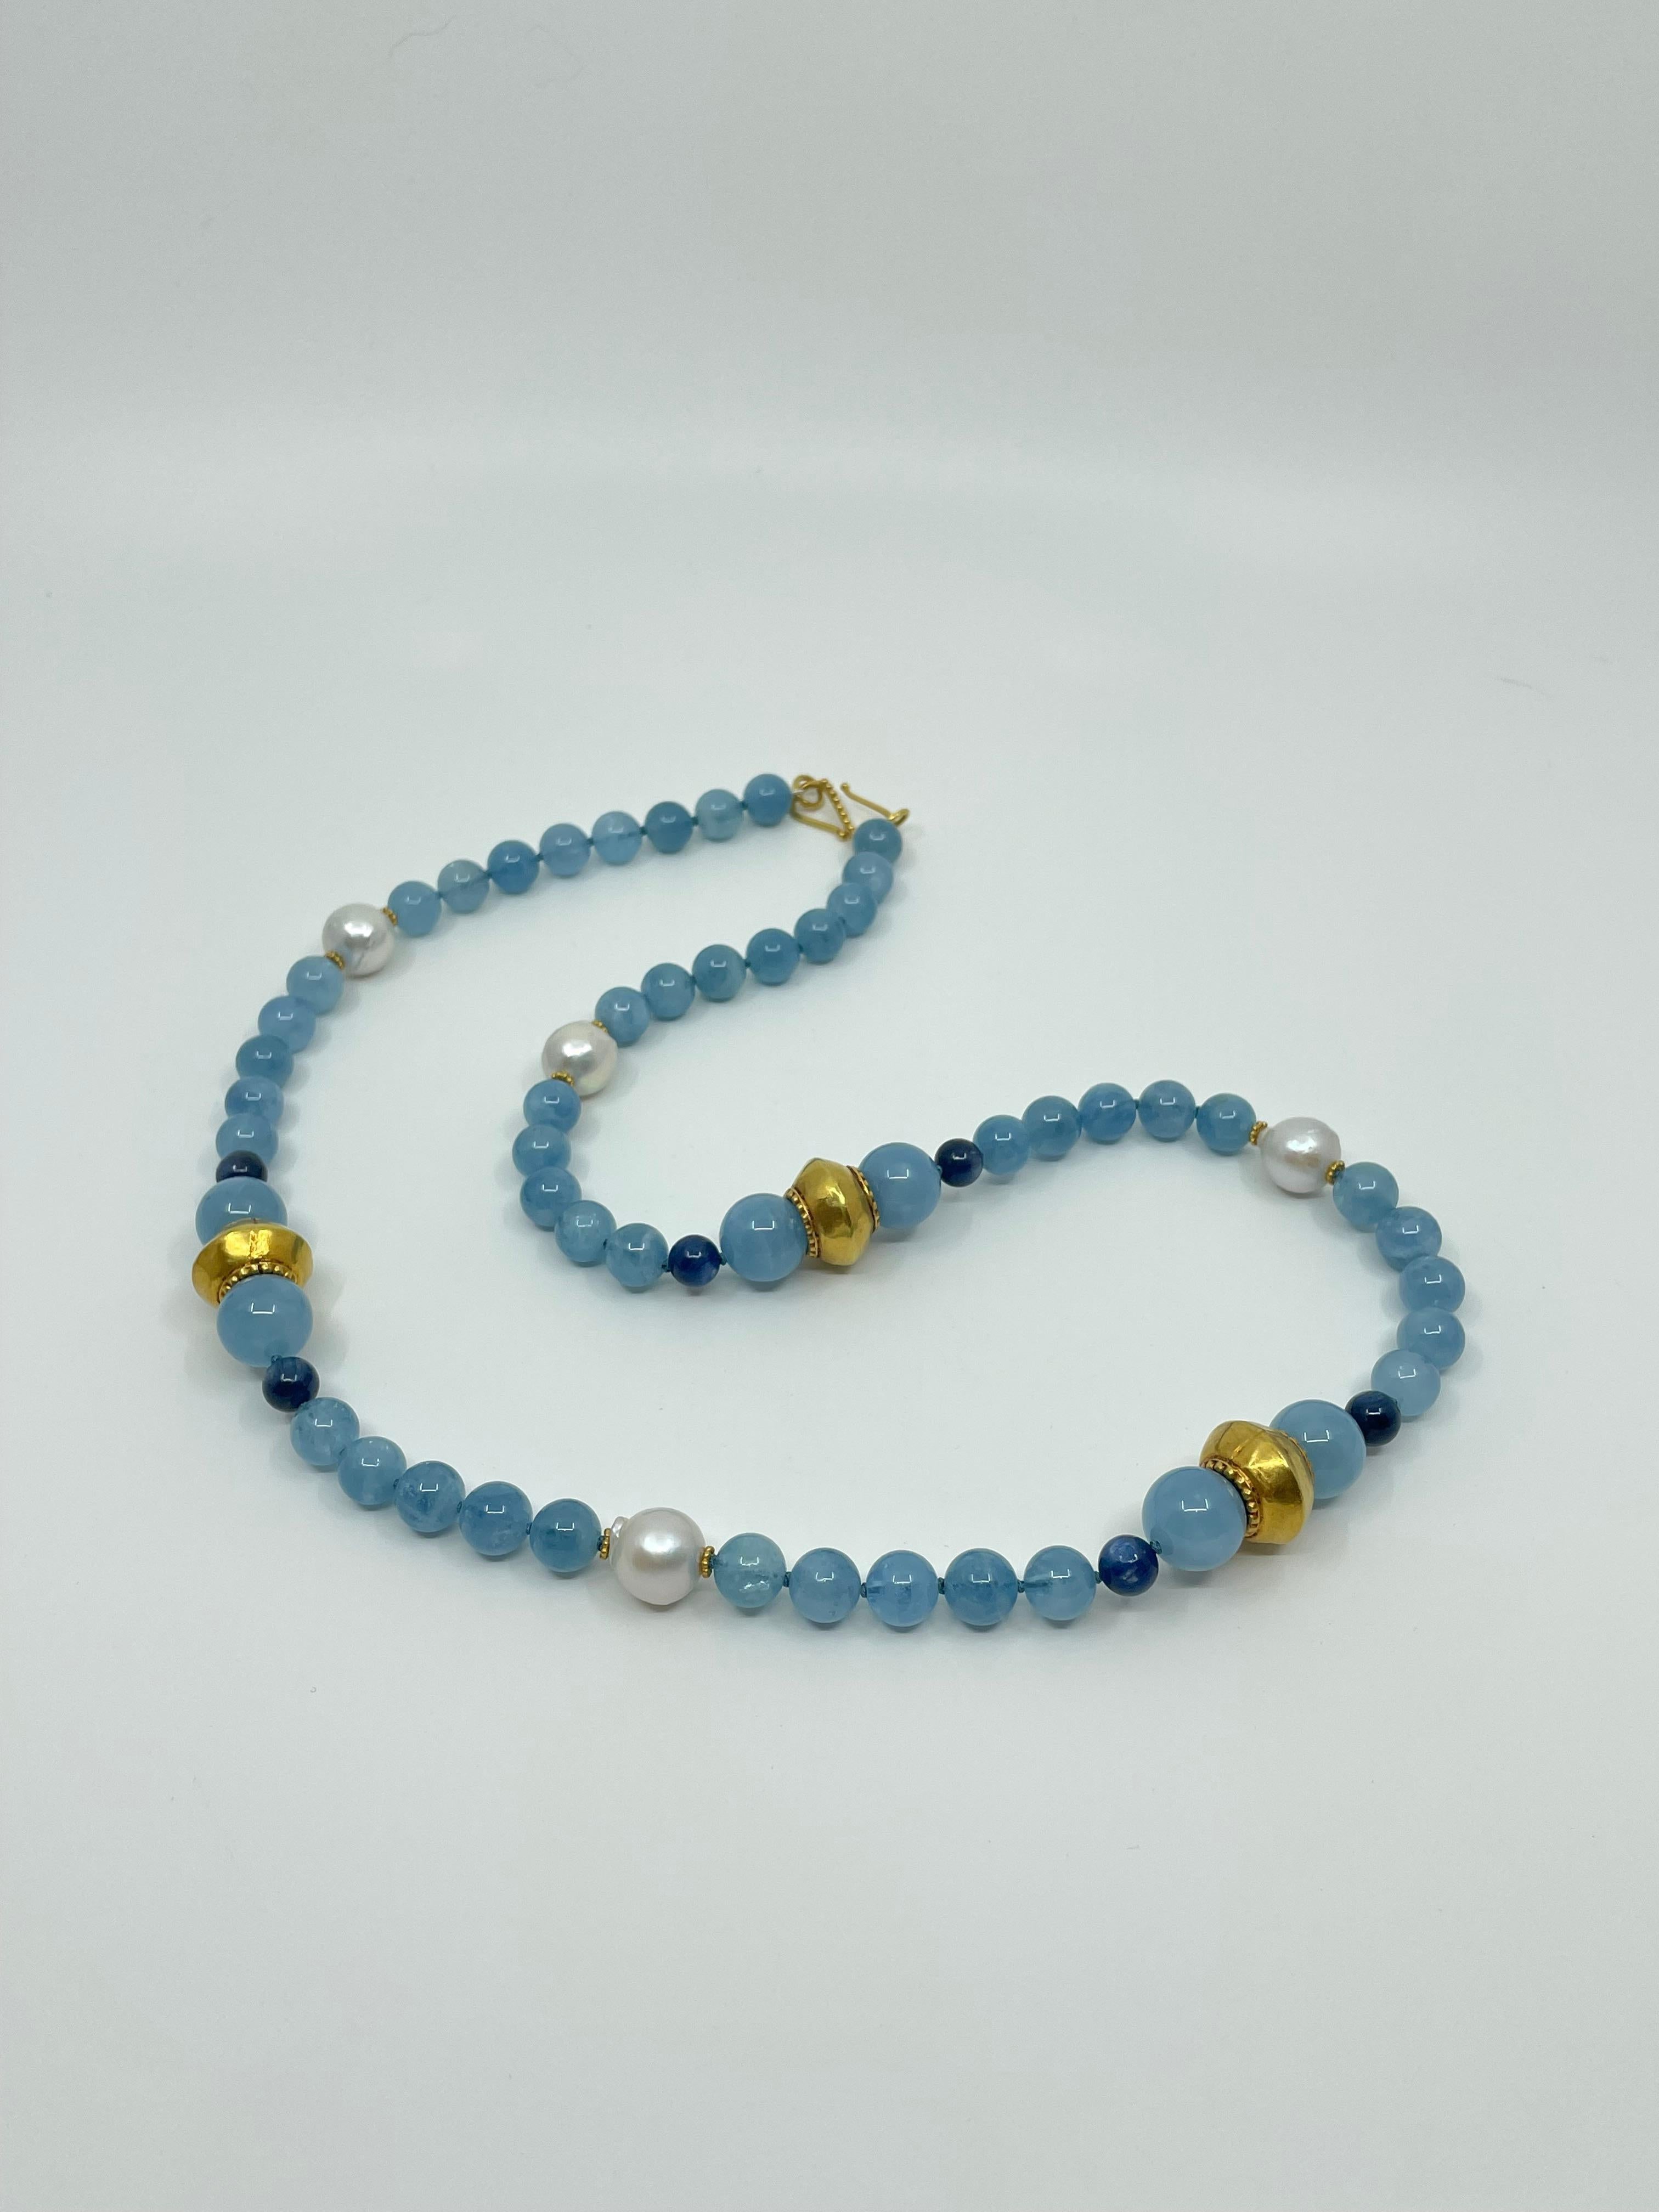 Necklace with Aquamarine, Kyanite, South Sea Pearls, Gold & 18K Gold For Sale 2